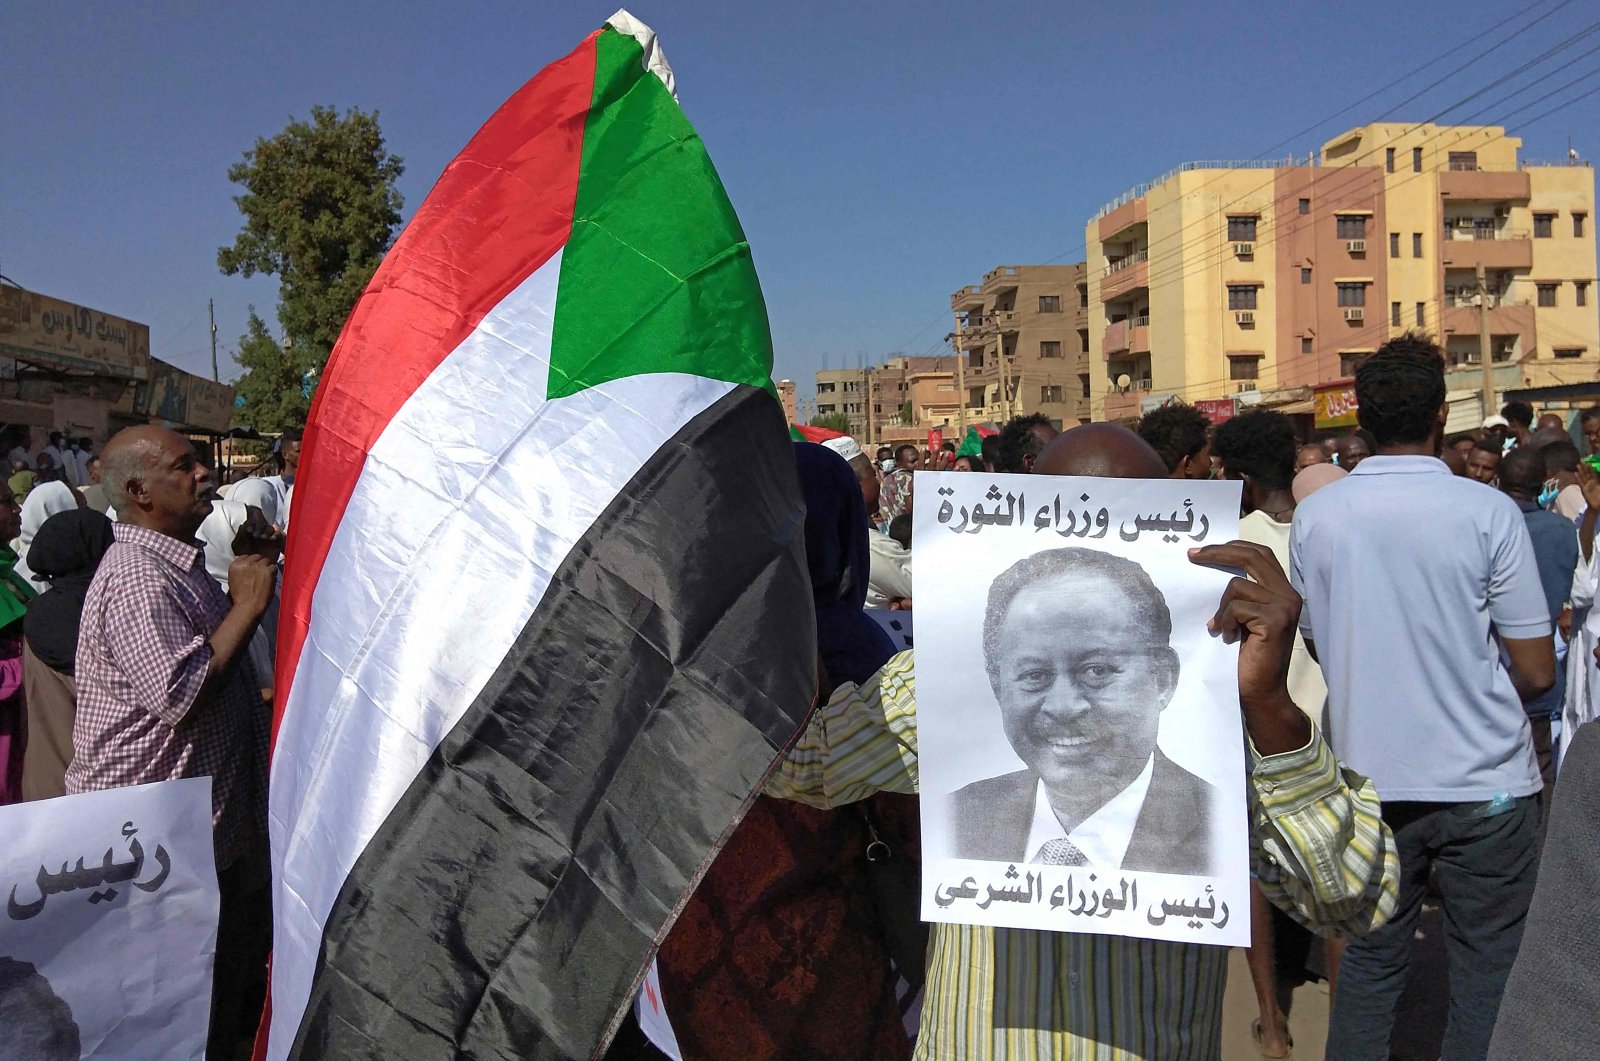 A Sudanese anti-coup protester holds a placard depicting ousted Prime Minister Abdalla Hamdok, who is under house arrest, and reading "legitimate prime minister" amid ongoing protests against last month&#039;s widely condemned military takeover in the "Street 40" of the capital&#039;s twin city of Umdurman, Sudan, Nov. 17, 2021. (AFP Photo)